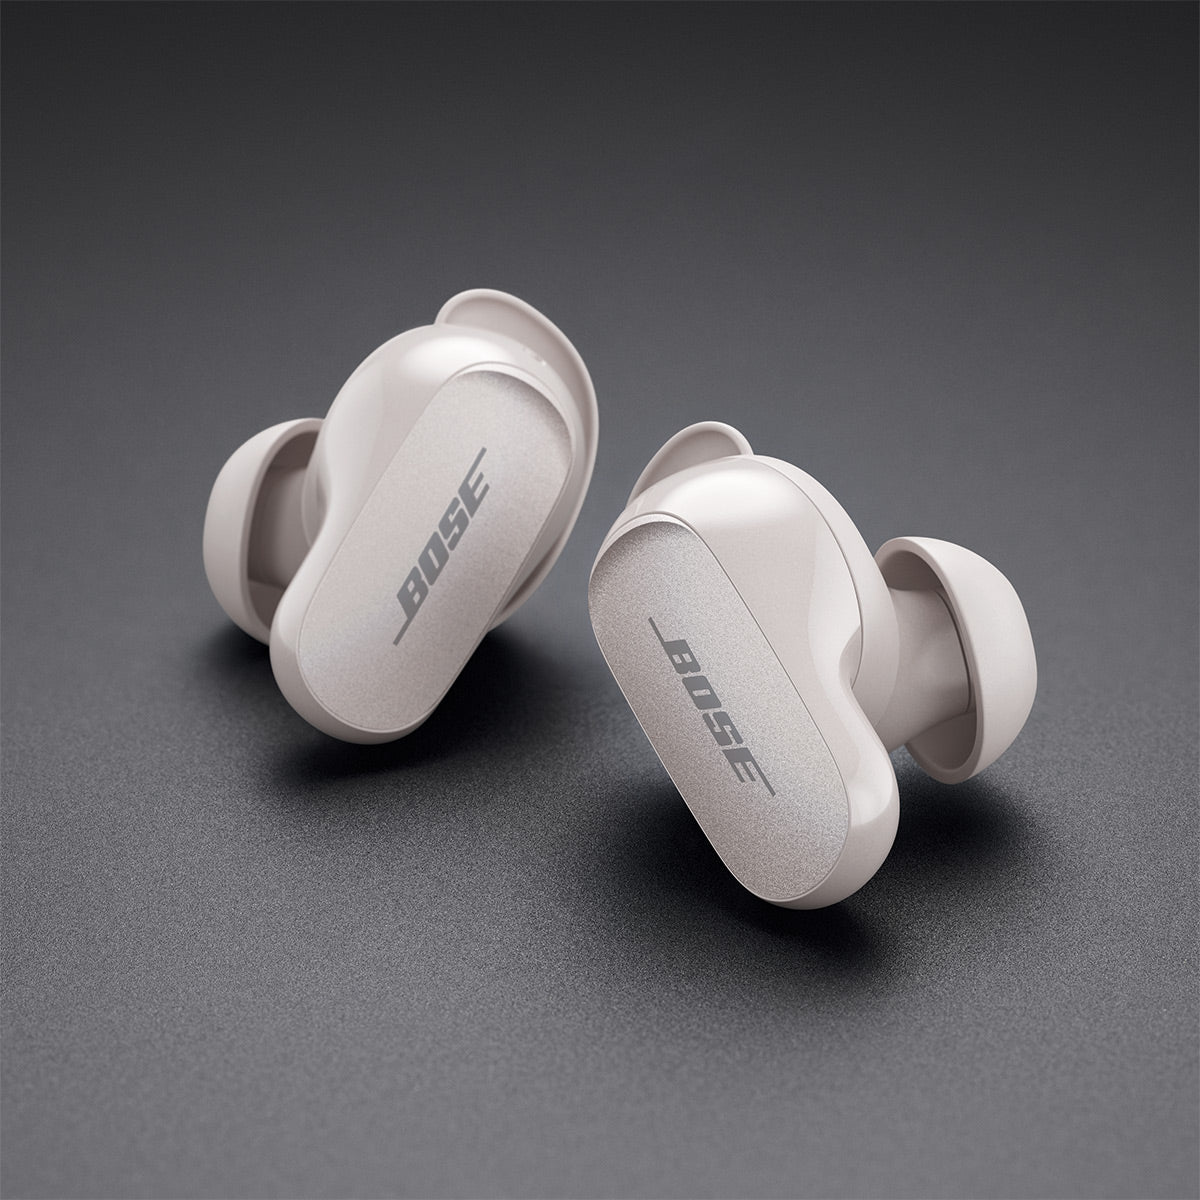 Bose QuietComfort Earbuds II True Wireless with Personalized Noise Cancellation (Soapstone) and Bose SoundLink Flex Bluetooth Portable Speaker (Black)